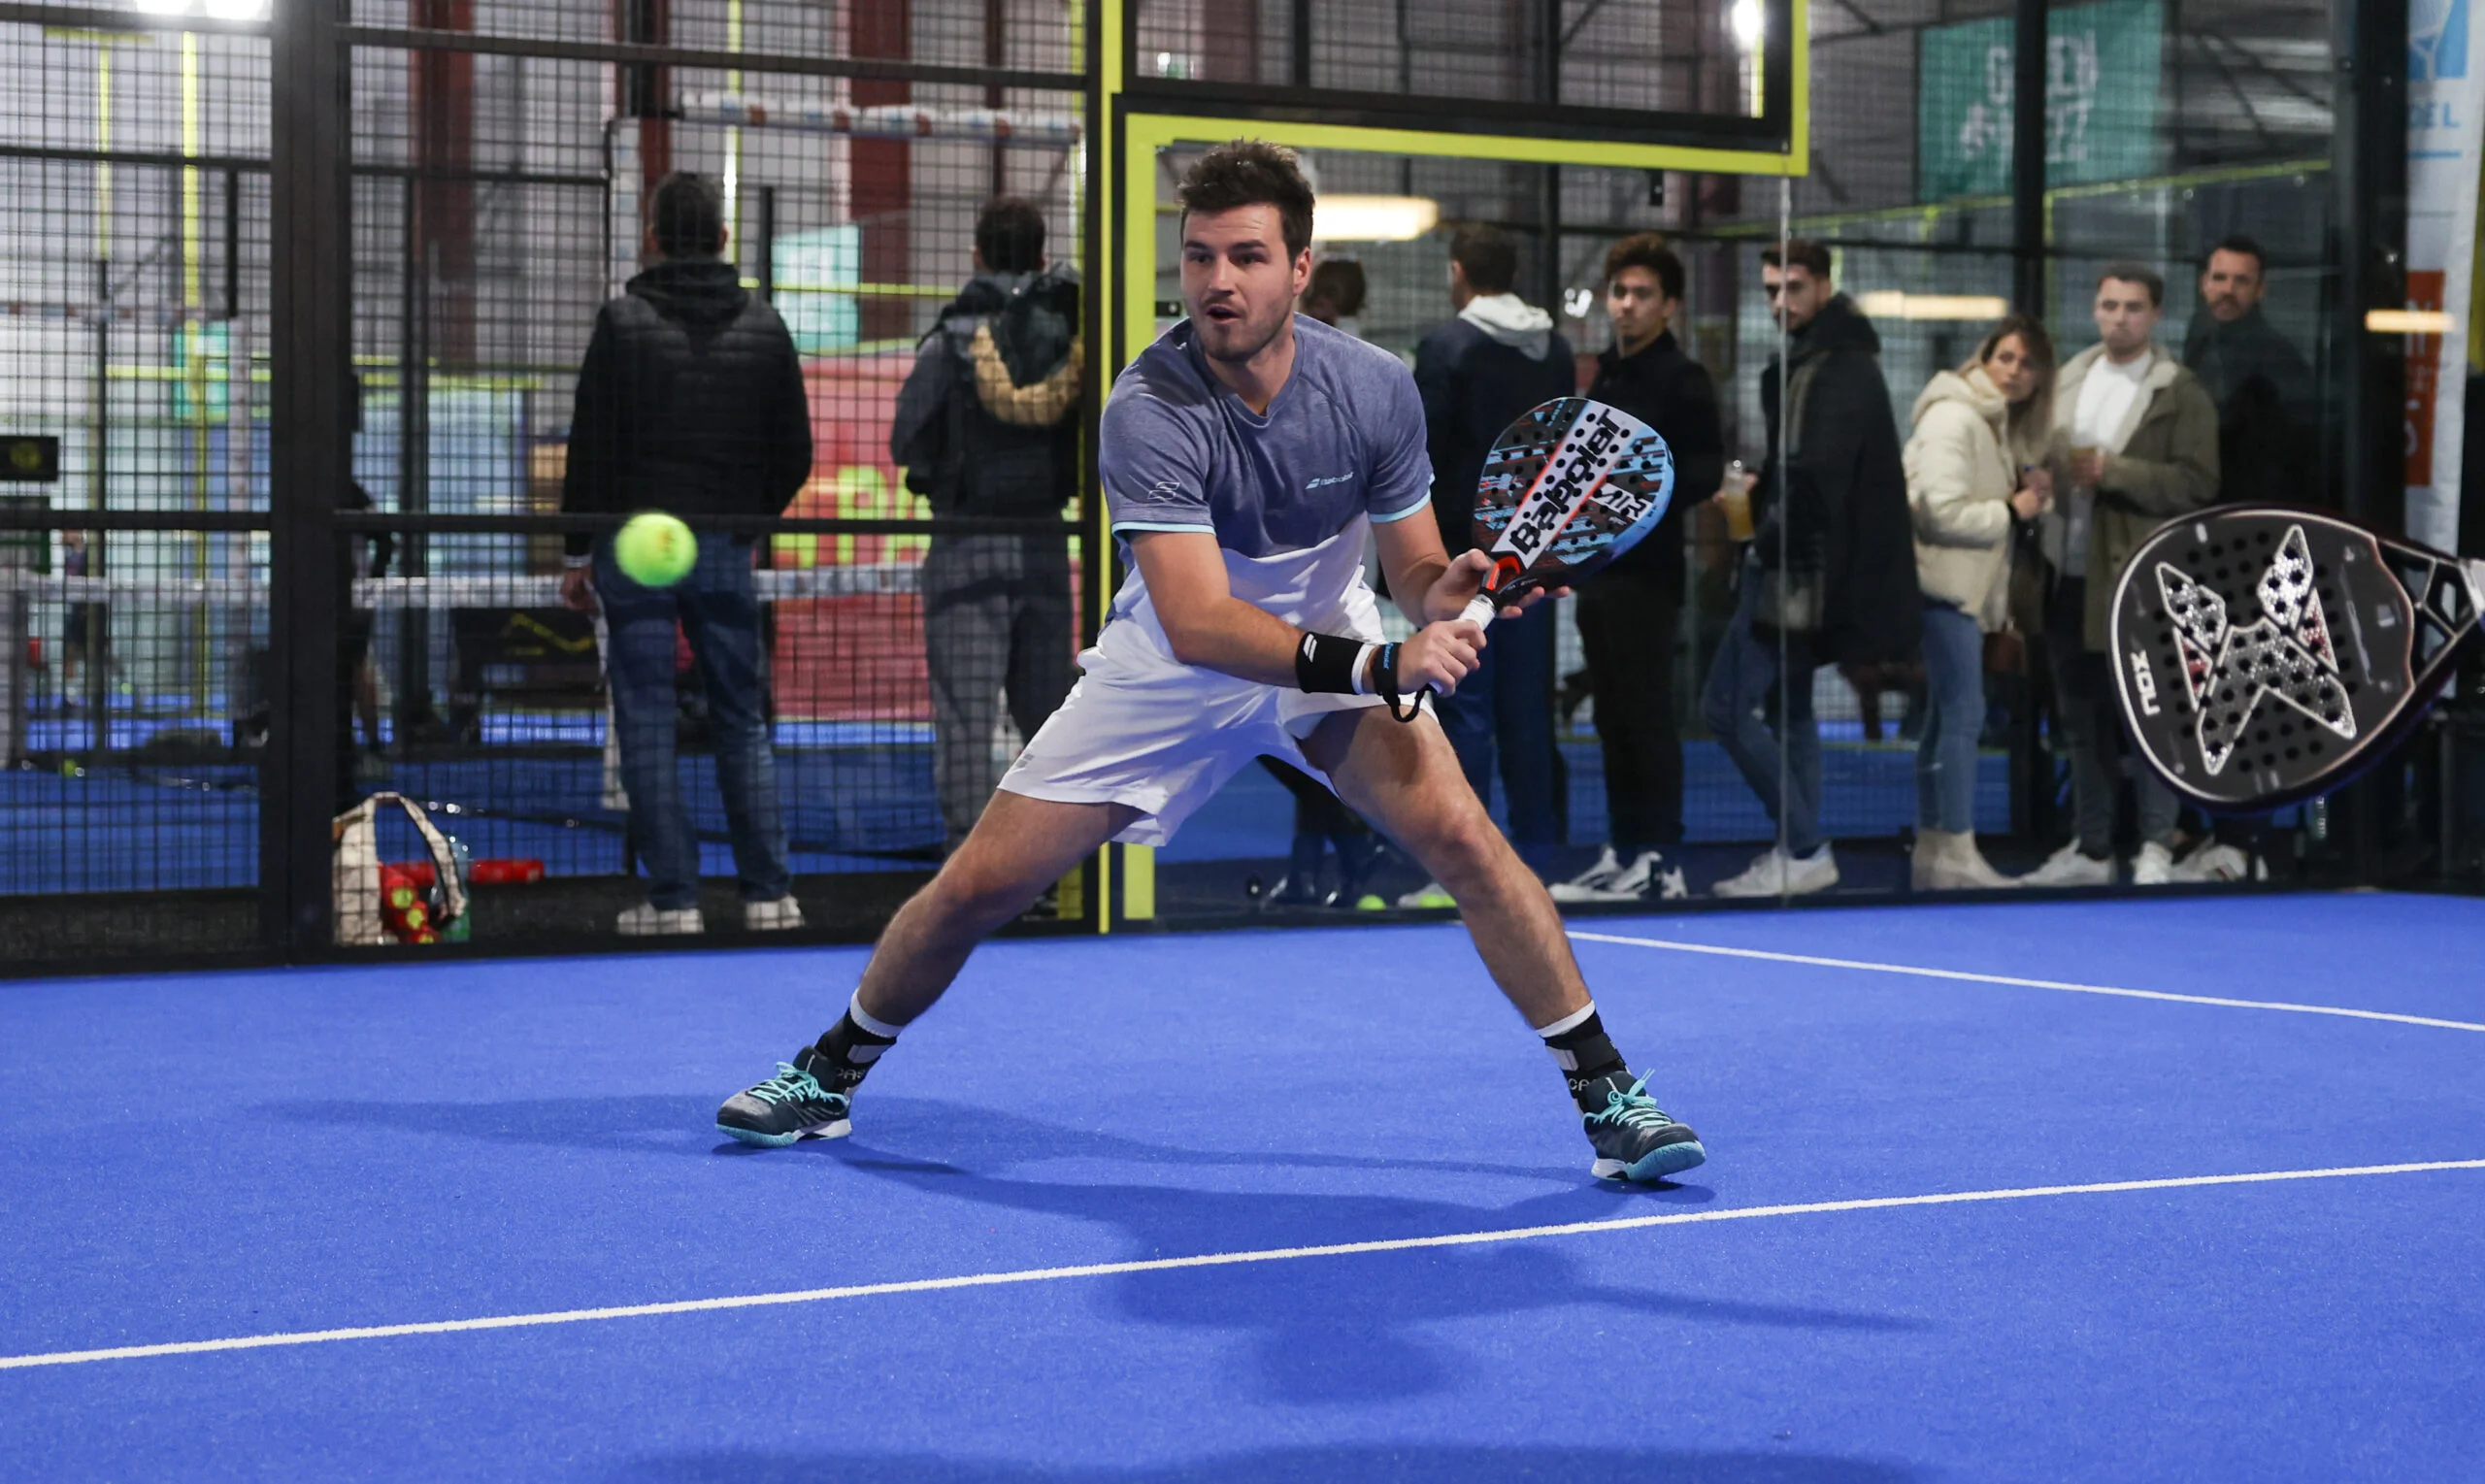 P2000 4Padel Strasbourg – Bergeron/Maigret in the final, the opportunity for Johan to make his comeback?